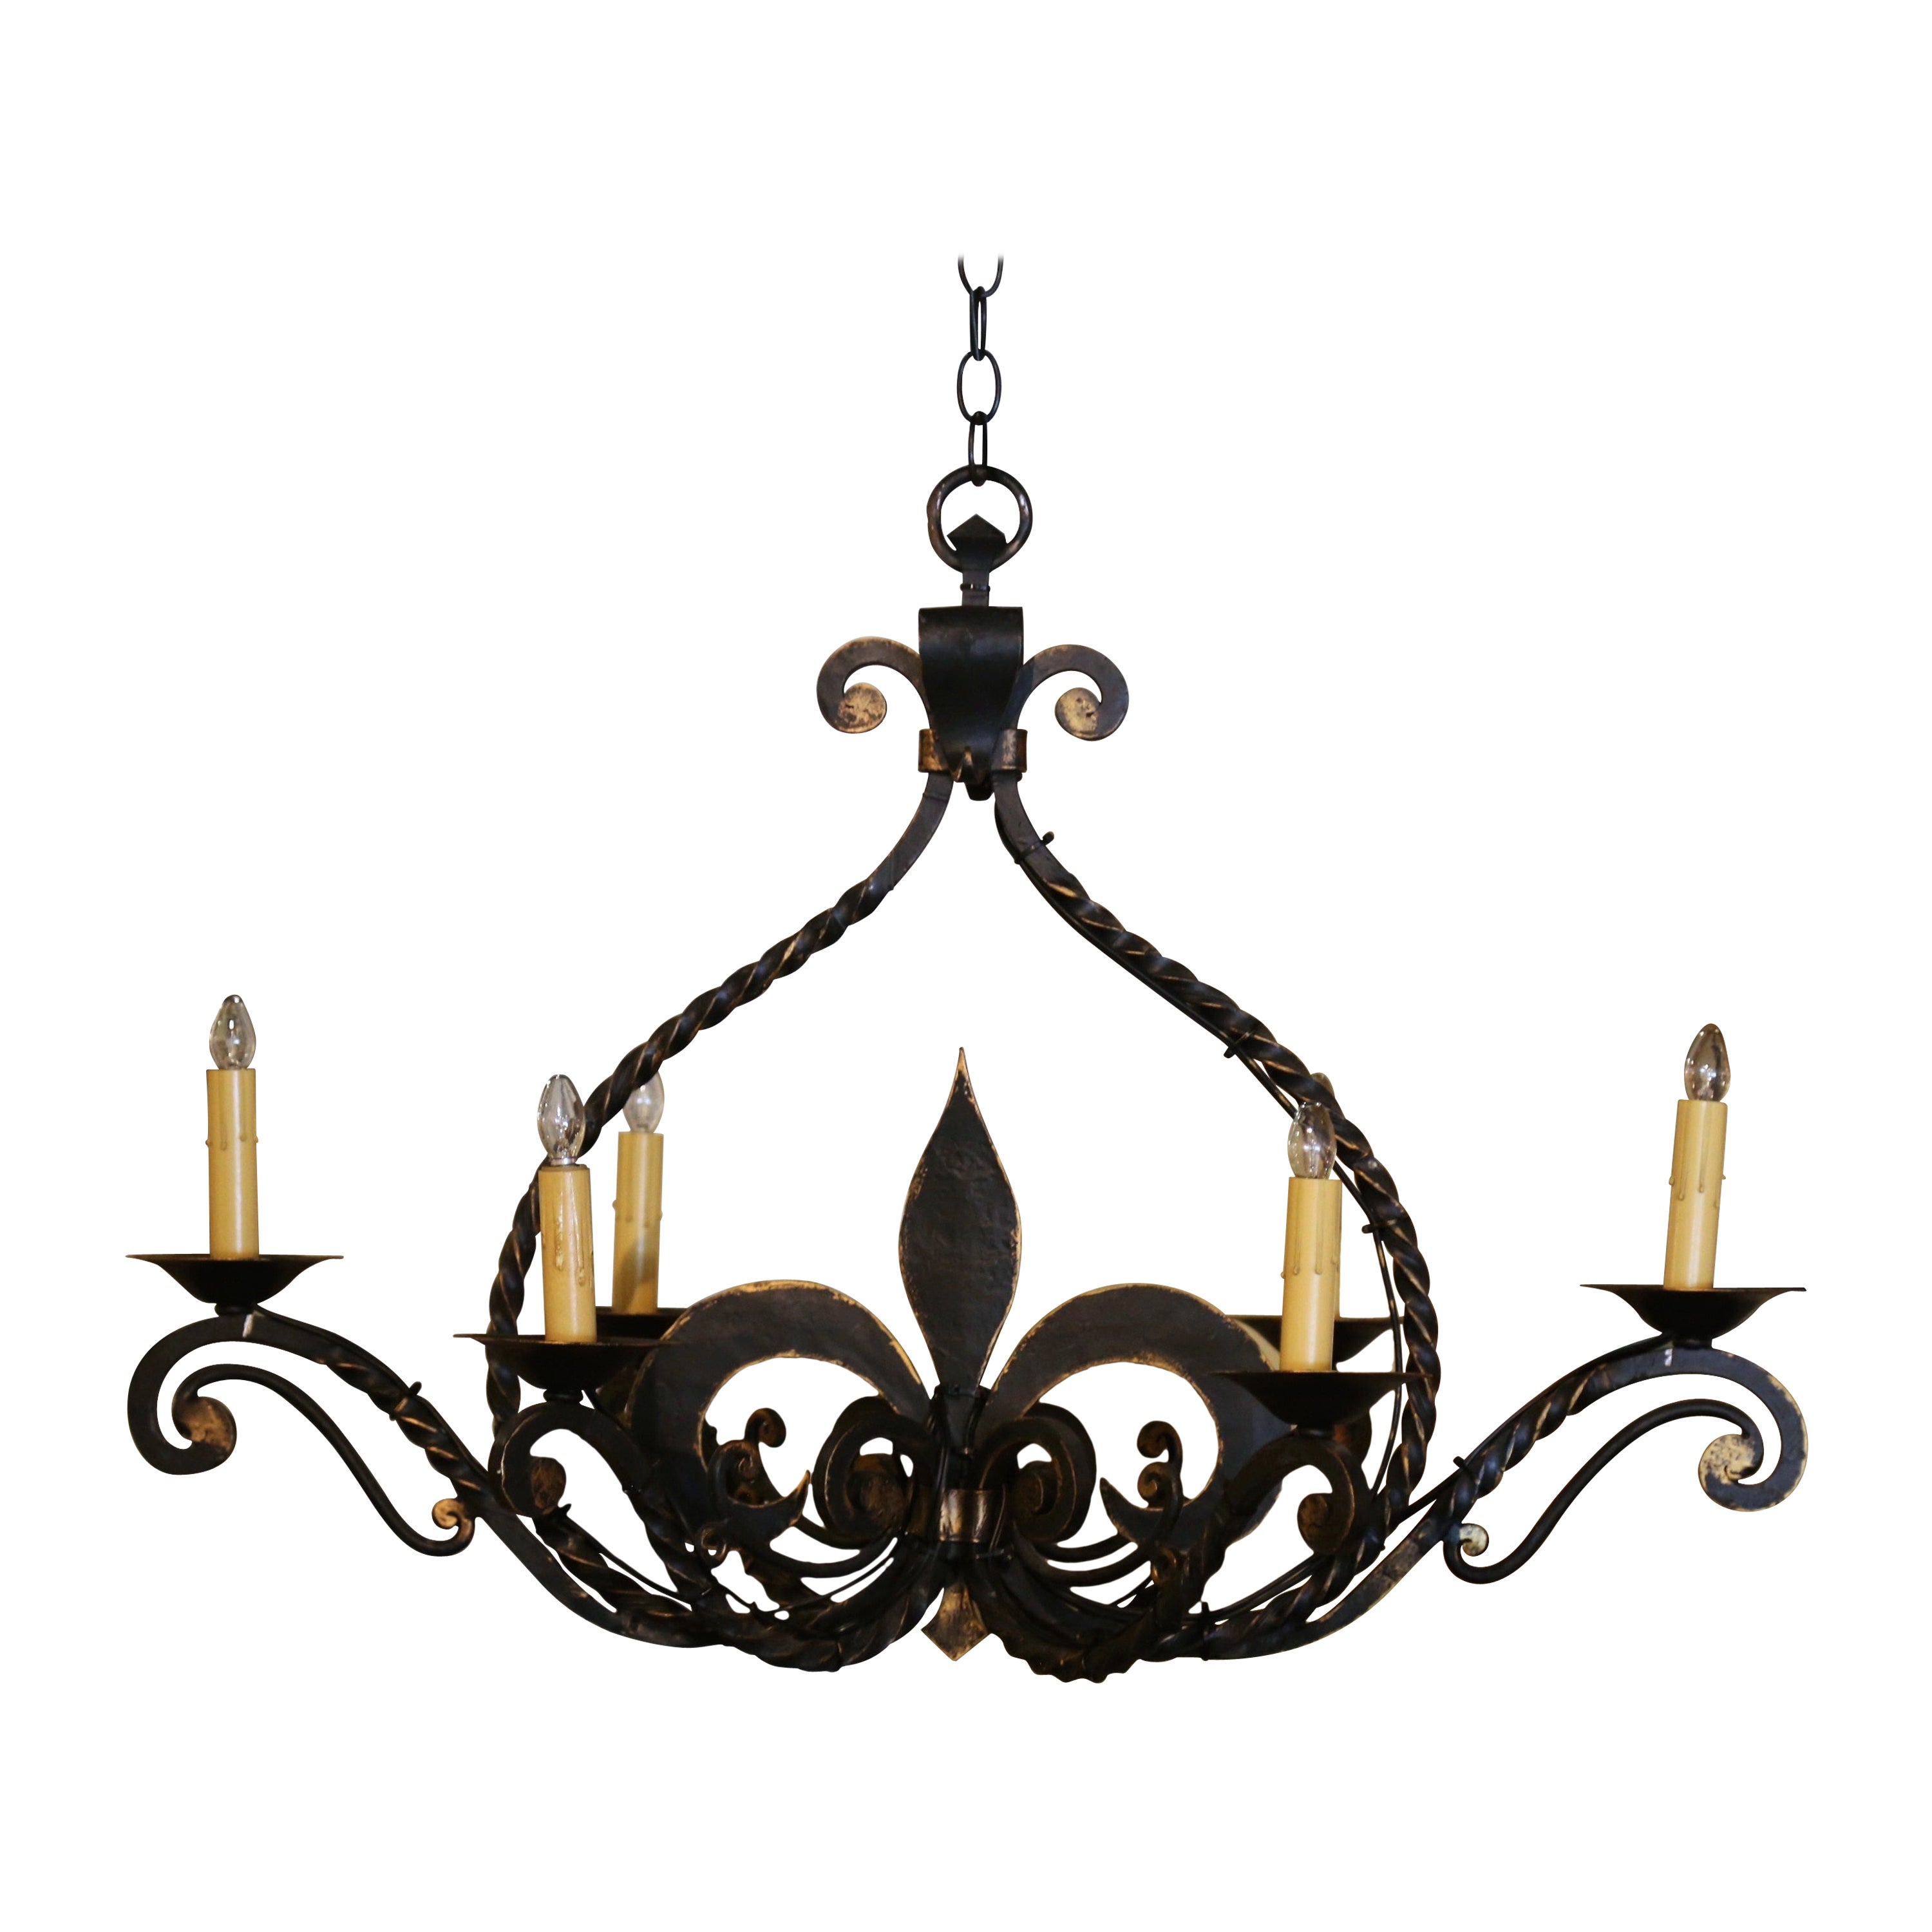  Early 20th Century French Gothic Wrought Iron Six-Light Fleur-de-Lys Chandelier